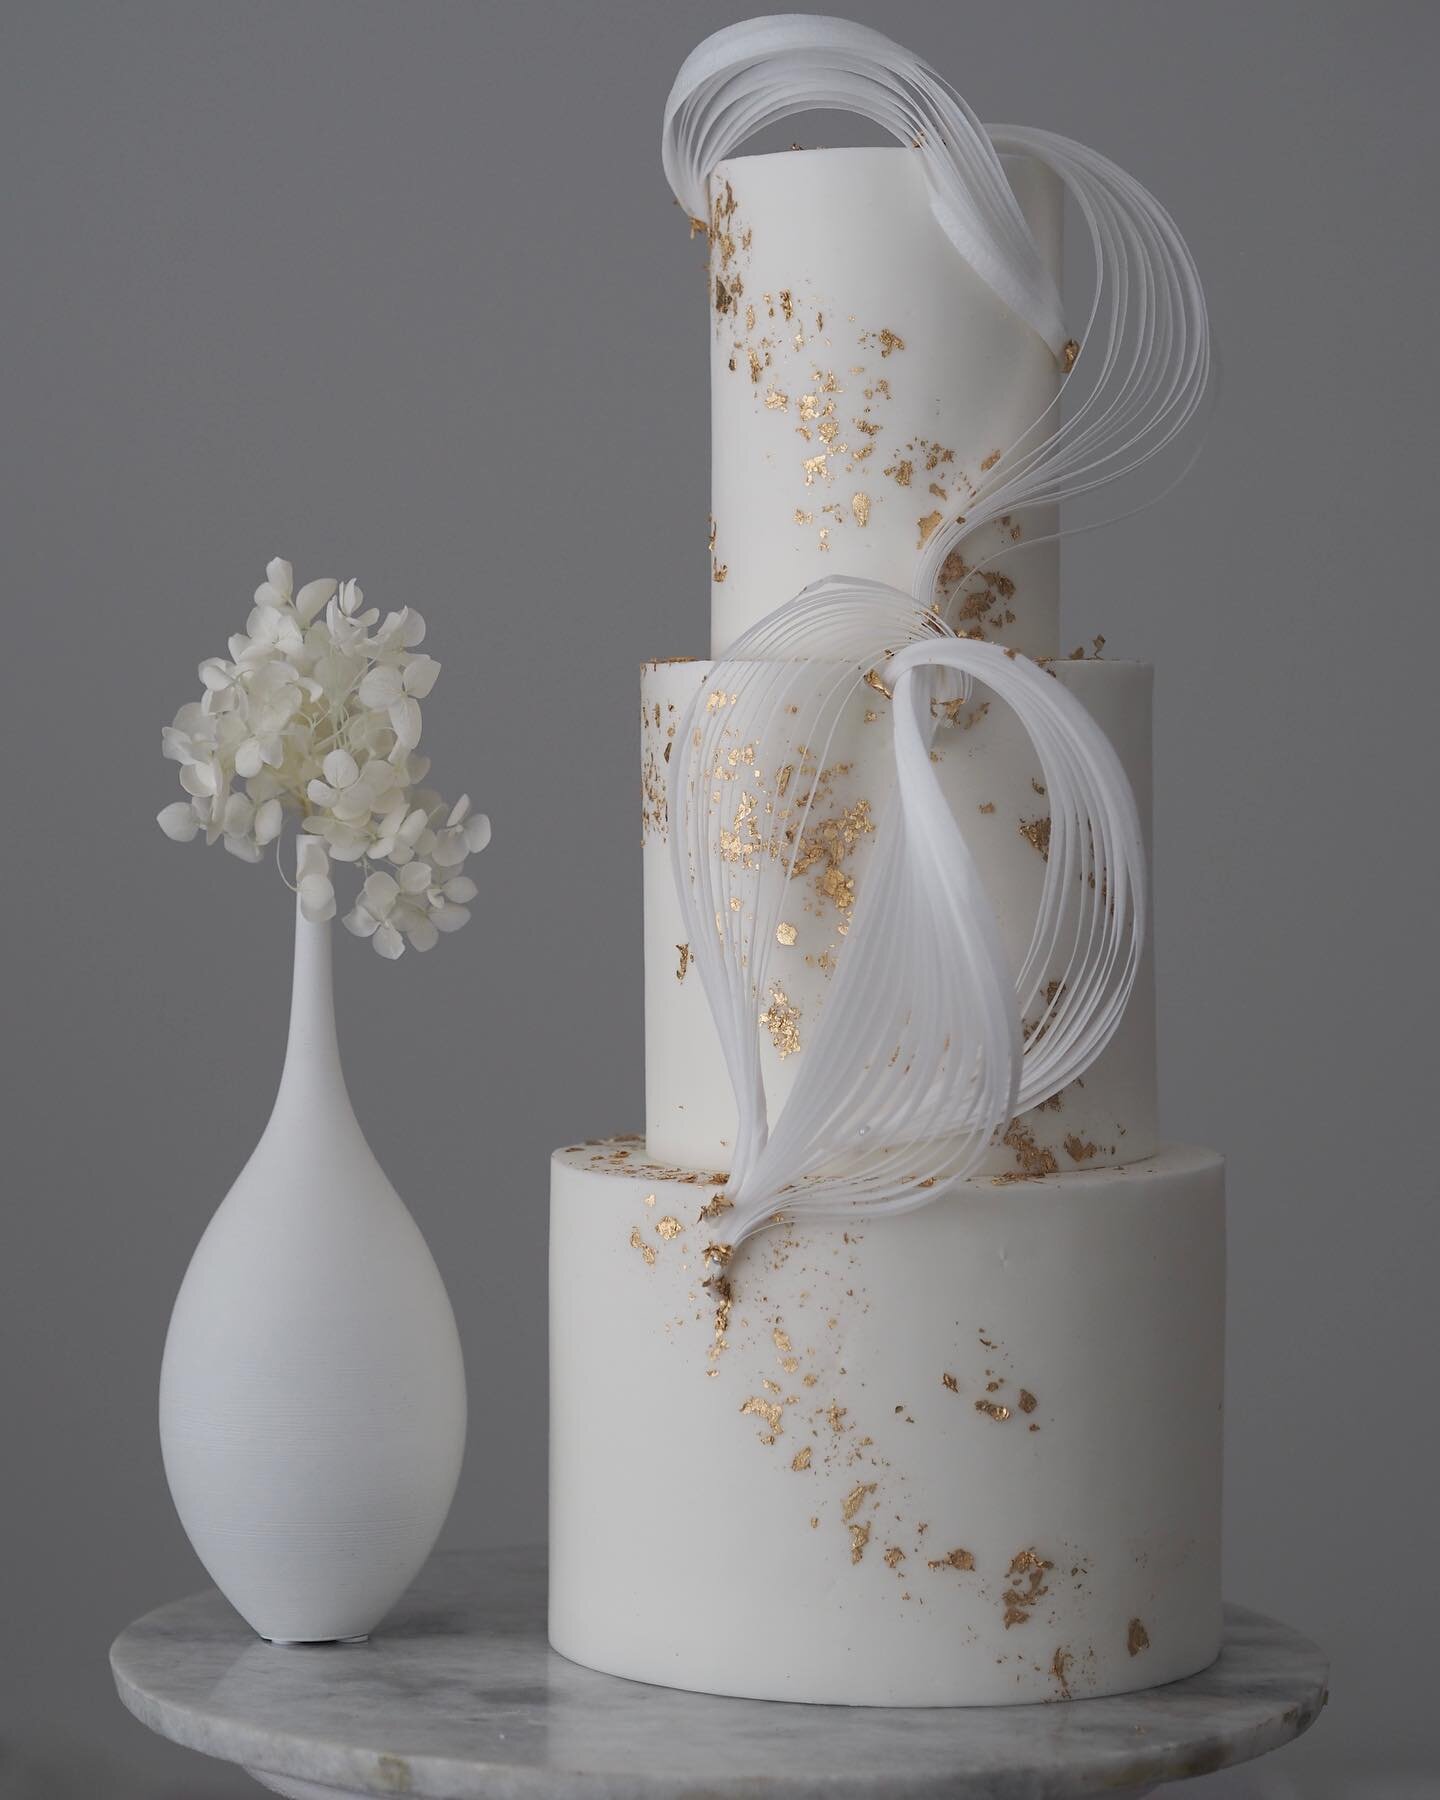 Bit of cake architecture for your hump day! 
.
I can&rsquo;t get enough of this sugar paper filigree design, it always takes on a different form every time I do it! Perfect for those that low simplicity and flow! 
.
#waferpaper #waferpaperflowers #wa